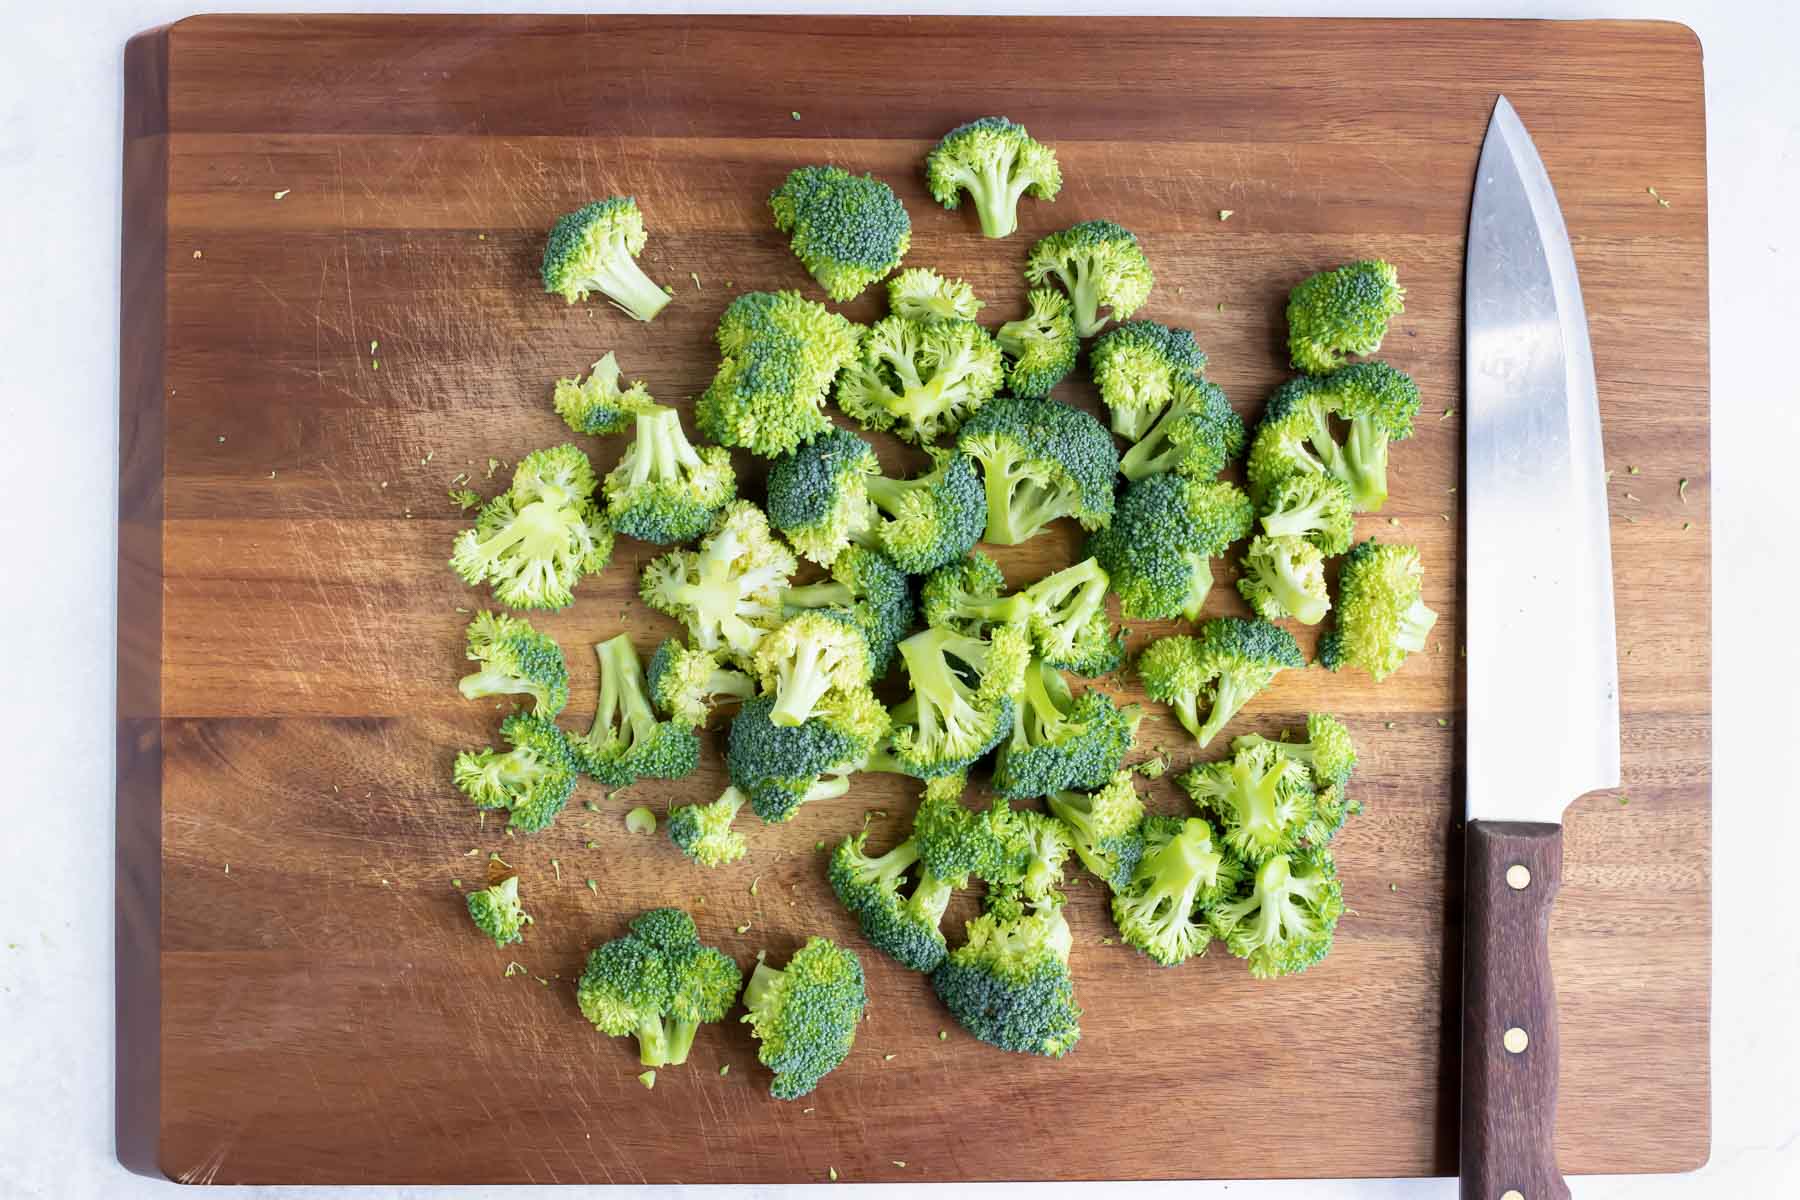 Broccoli florets are chopped on a wooden cutting board.